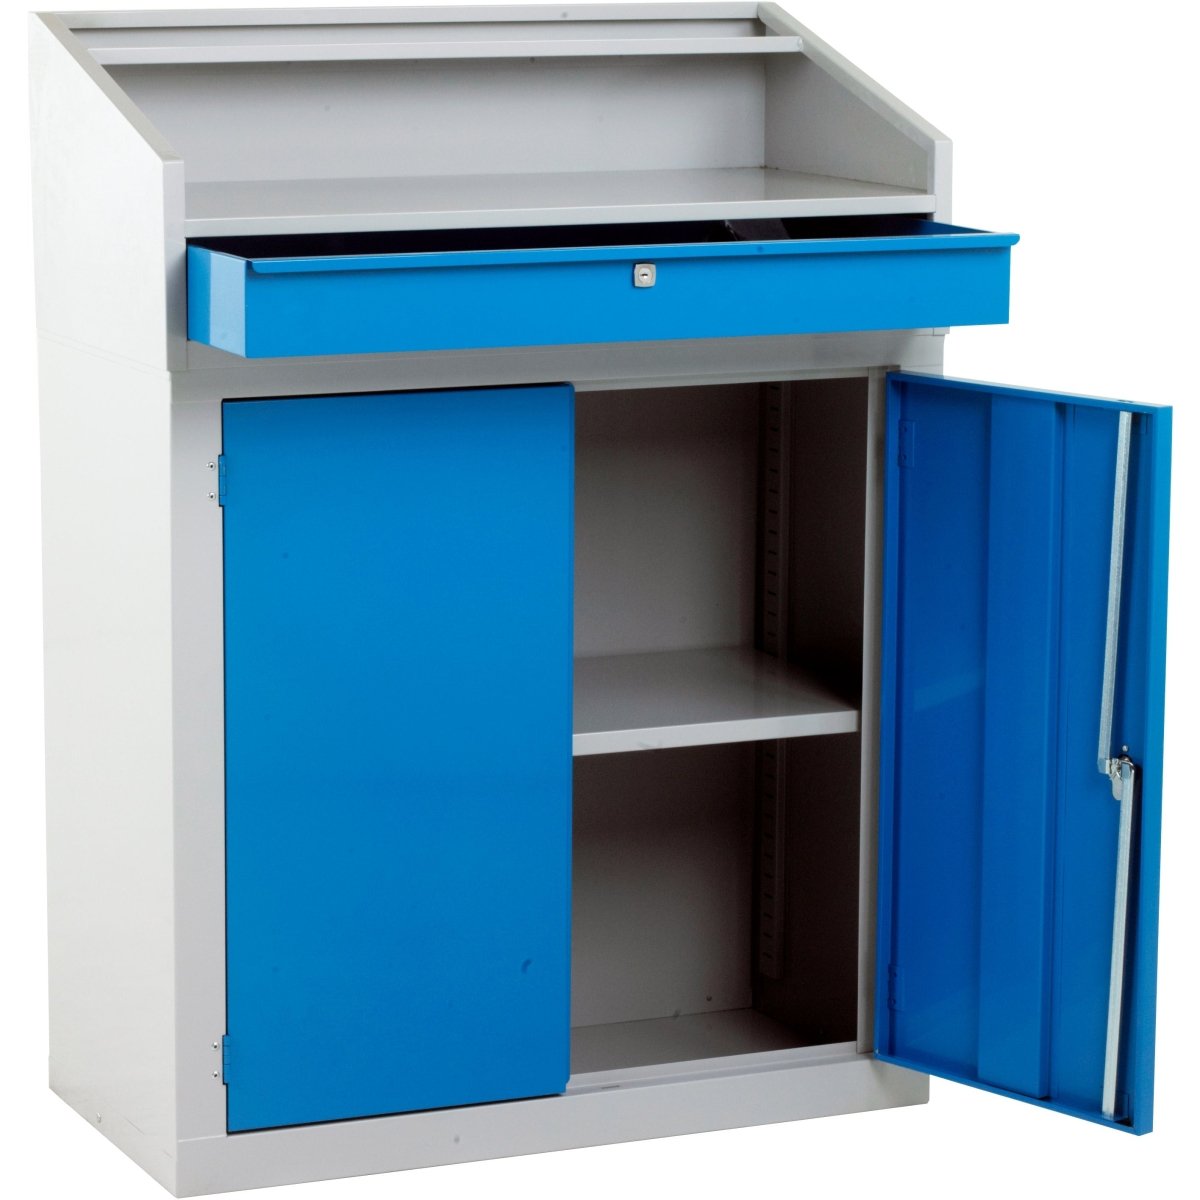 Foreman's Cupboard Desk - Warehouse Storage Products